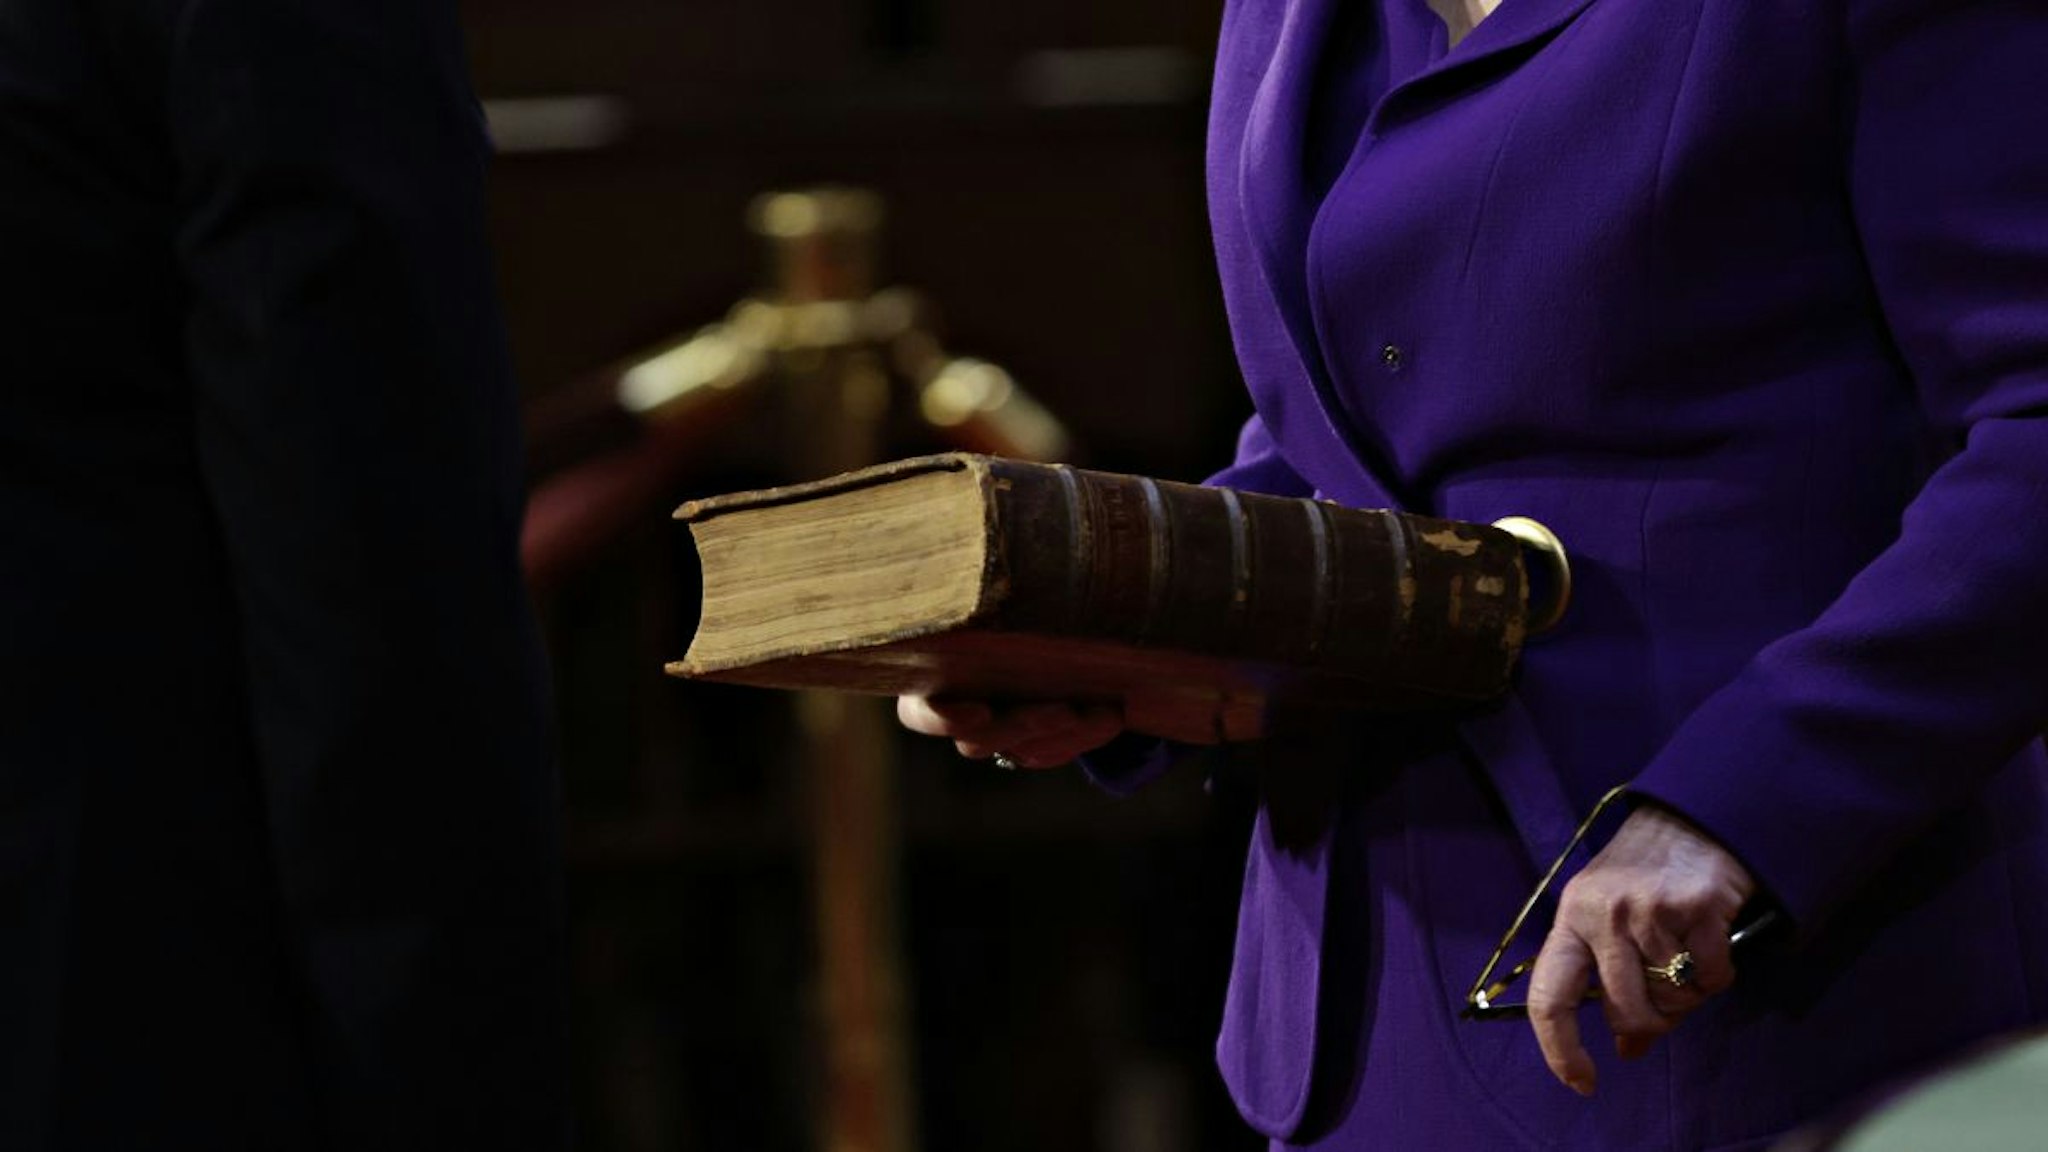 A Catholic Bible on loan from the U.S. Library of Congress is held before Senator Ed Markey, a Democrat from Massachusetts, not pictured, is ceremoniously sworn-in at the U.S. Capitol in Washington, D.C., U.S., on Sunday, Jan. 3, 2021.